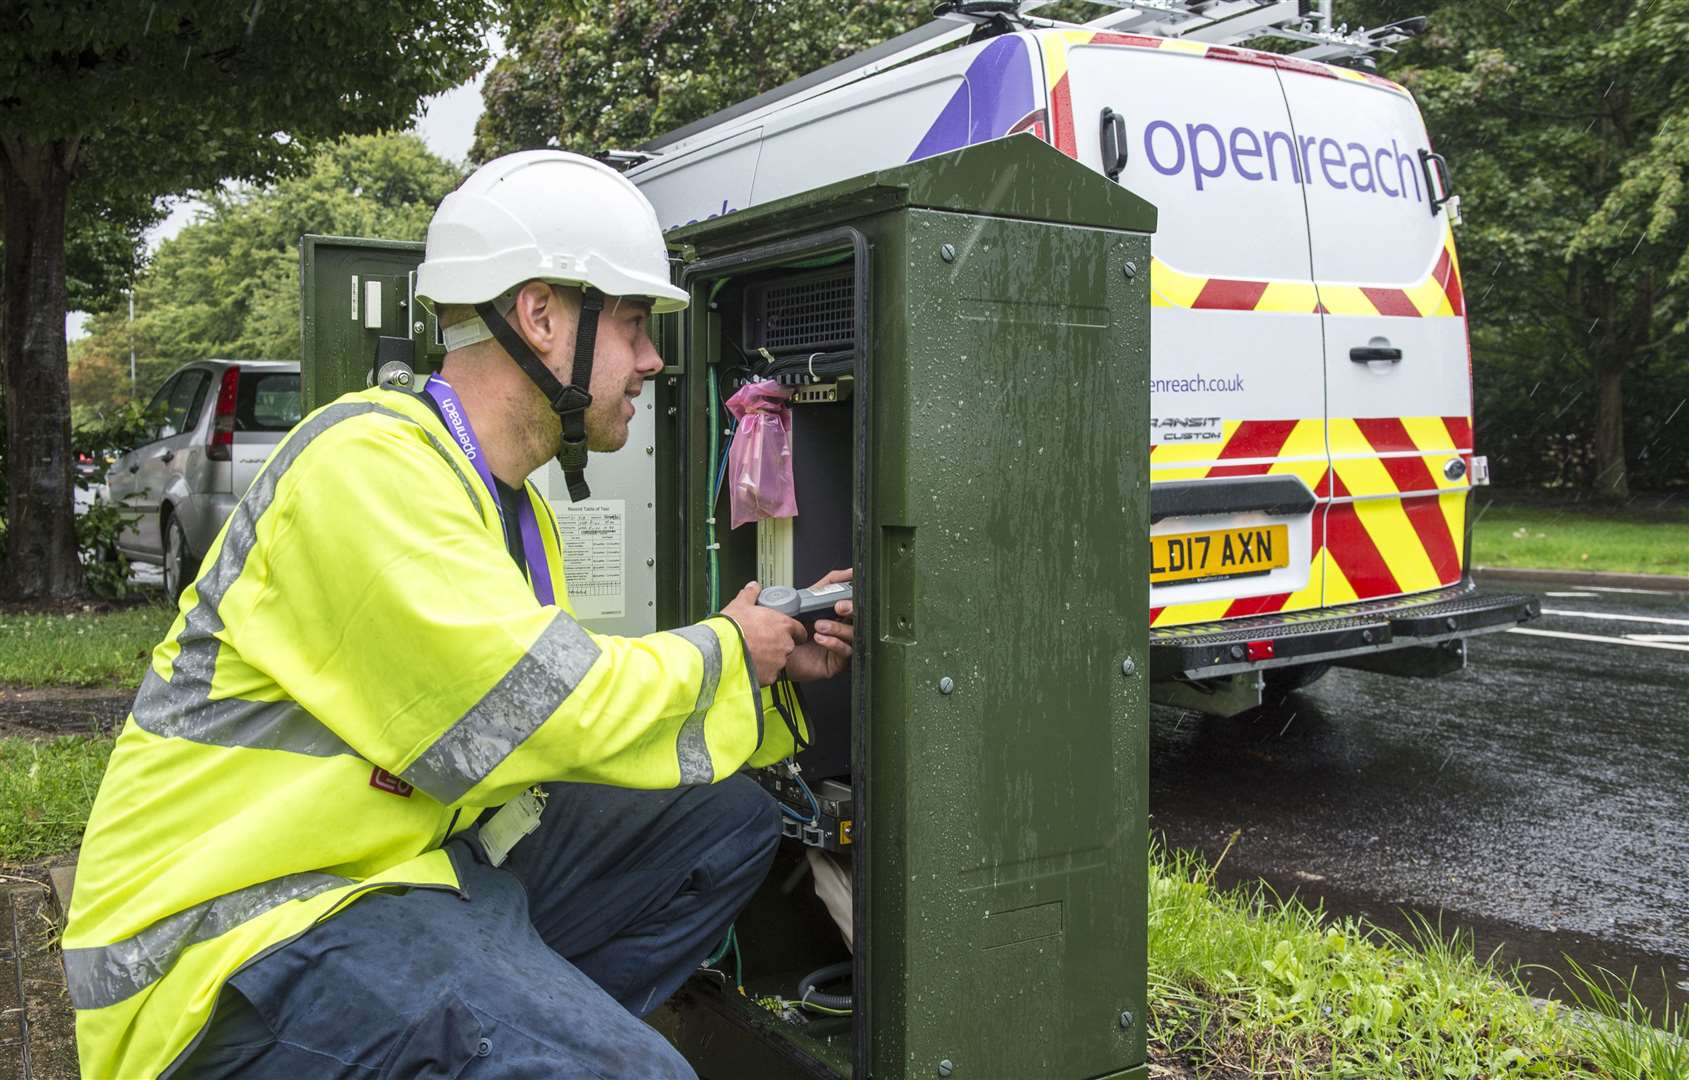 Openreach is pledging to boost speeds in various locations across Kent